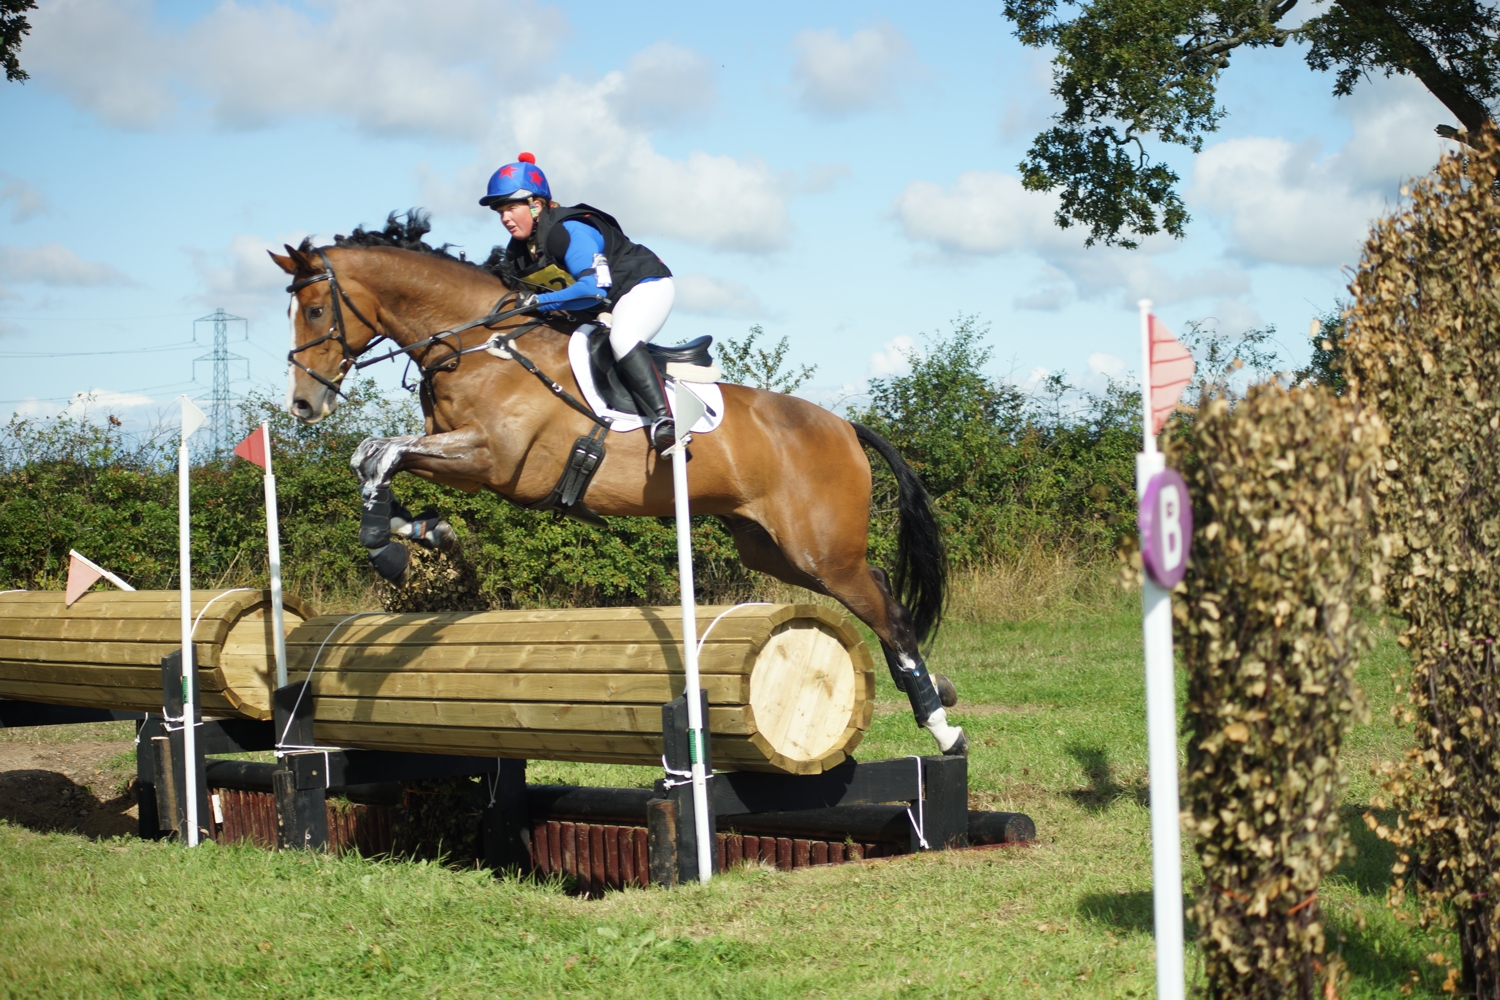 WIN VIP tickets to Cumwhinton Horse Trials.